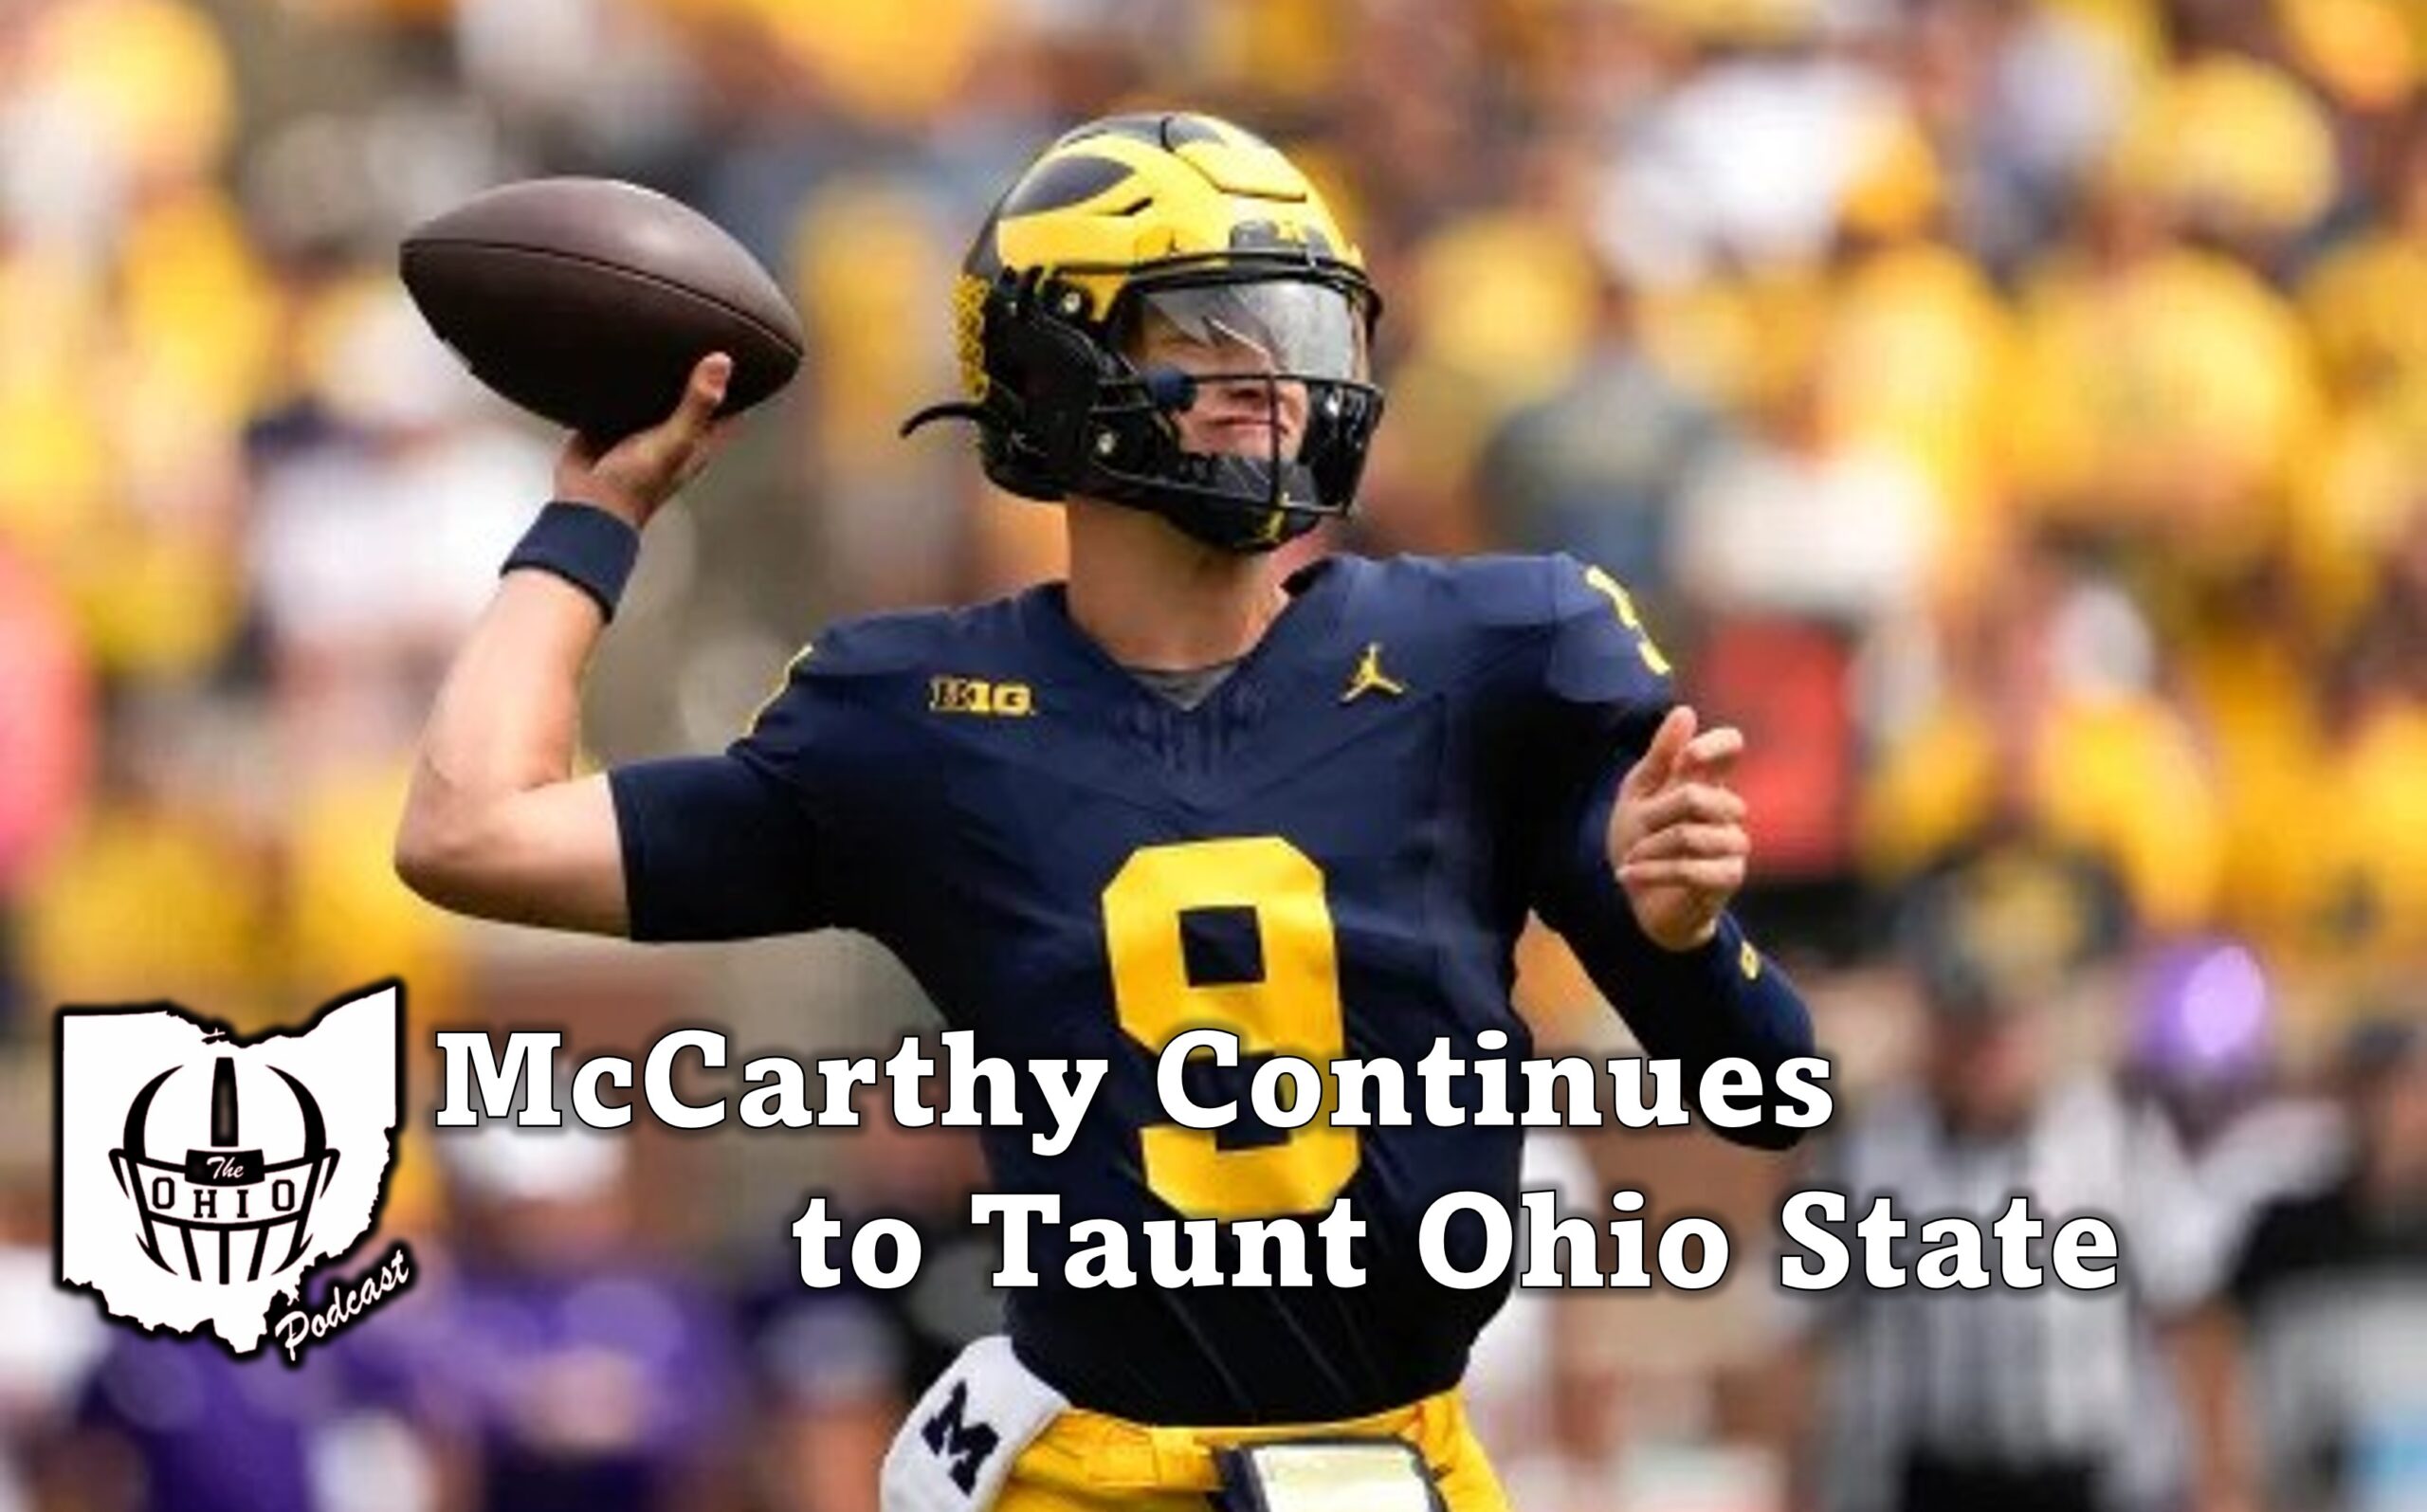 J.J. McCarthy Continues to Taunt Ohio State